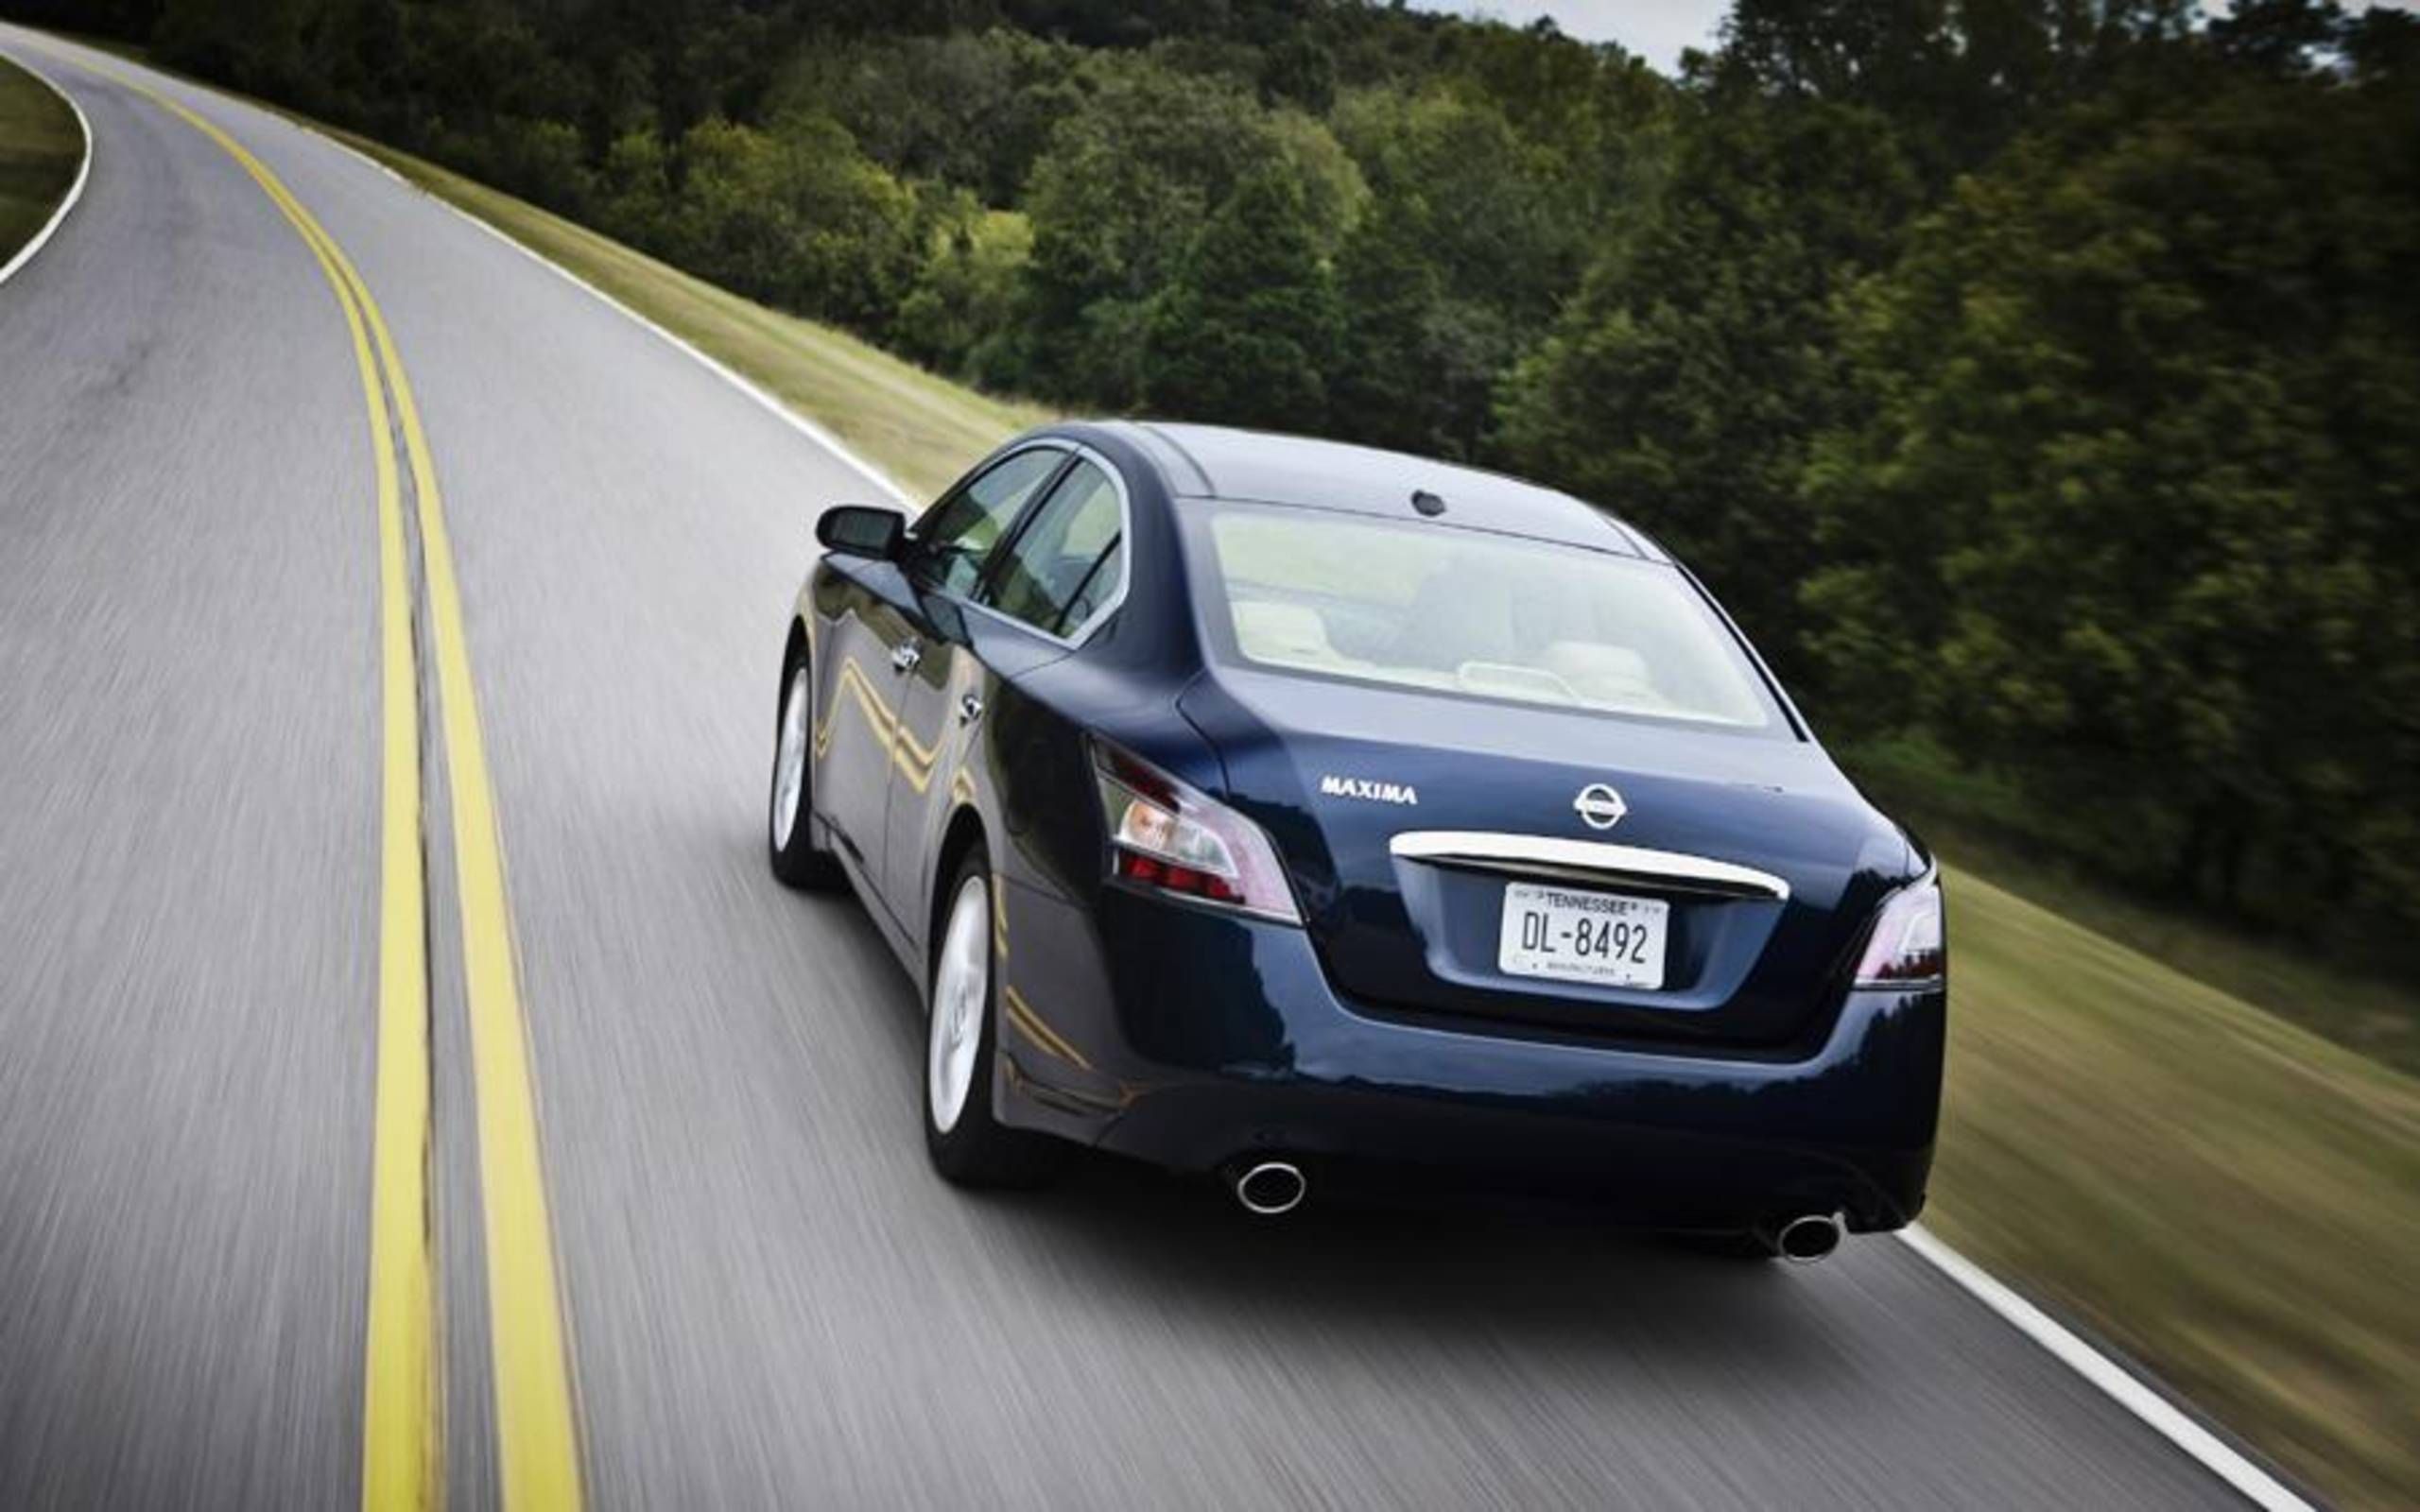 2013 Nissan Maxima 3.5 SV review notes